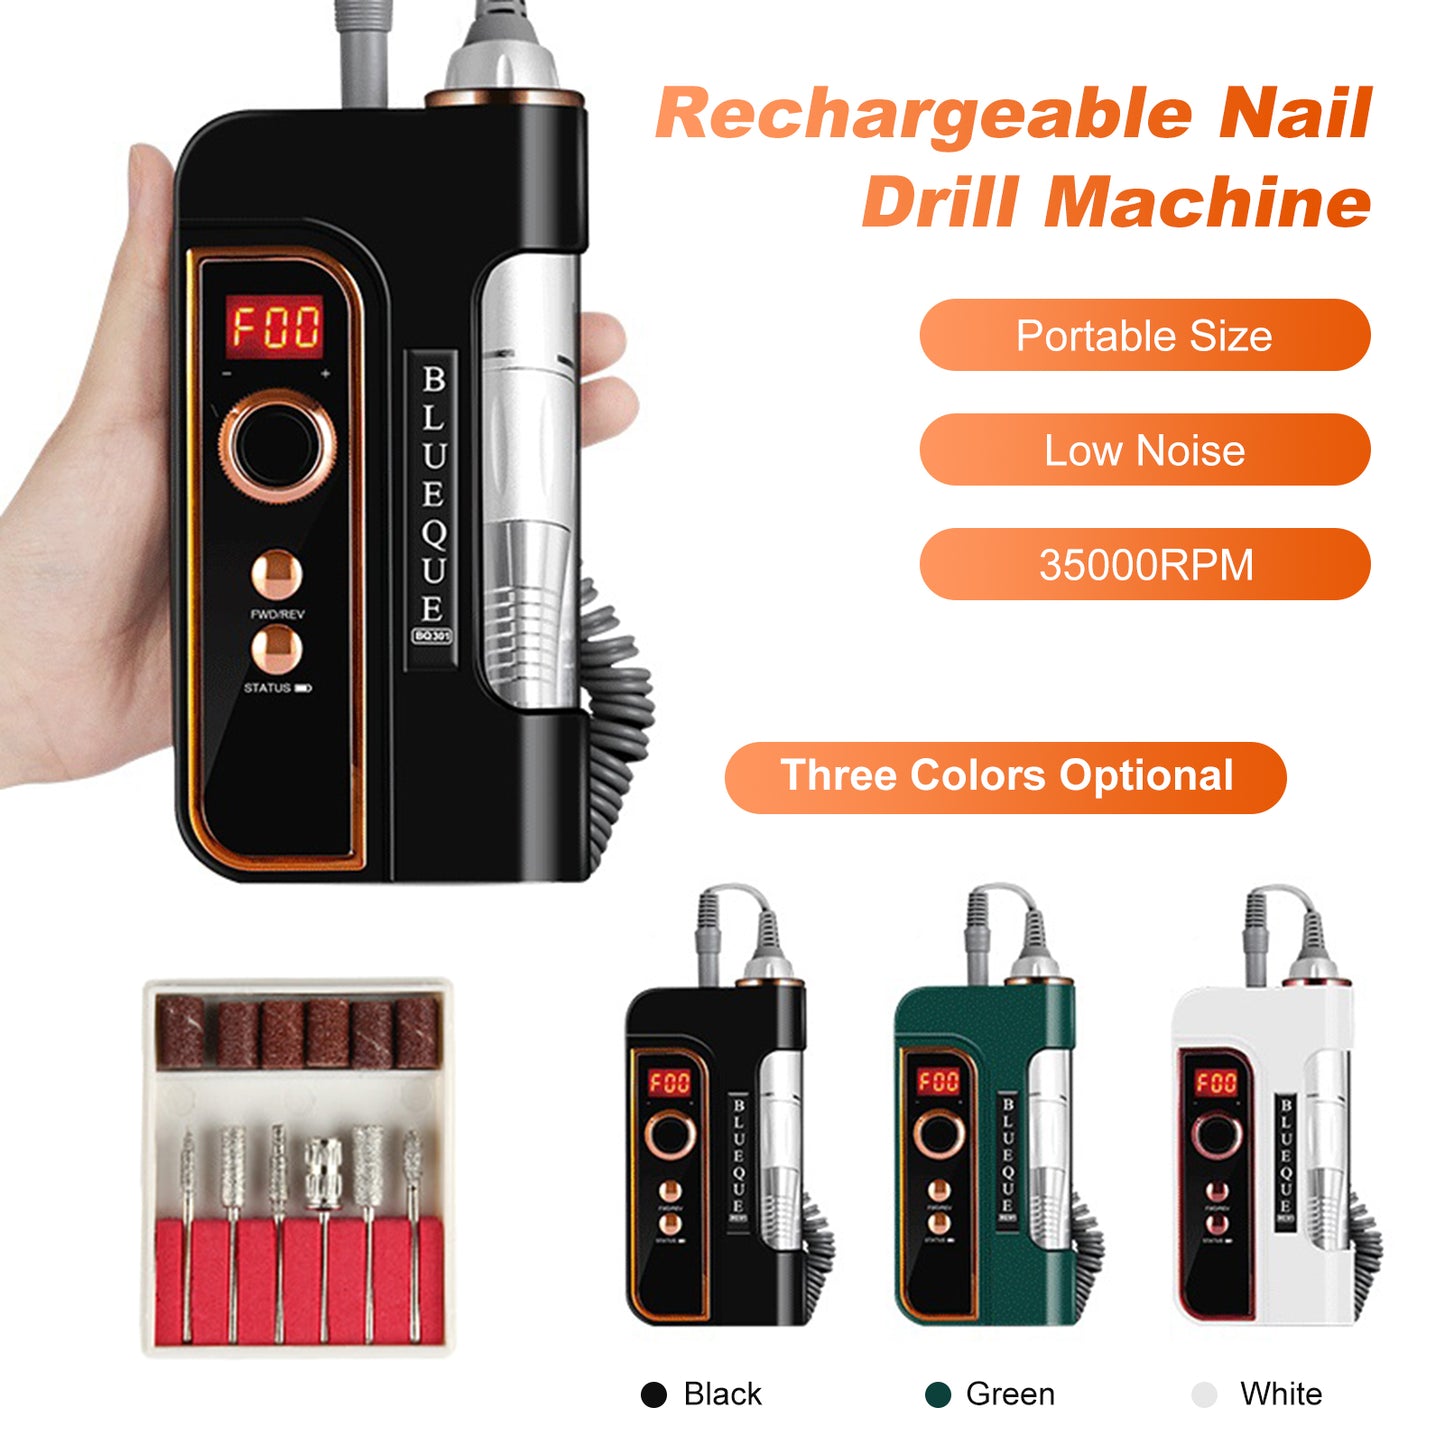 Nail Drill Machine 35000RPM Mini Rechargeable Electric Nail Polishing Tool Kit with Interchangeable Grinding Bits Nail Art Tool